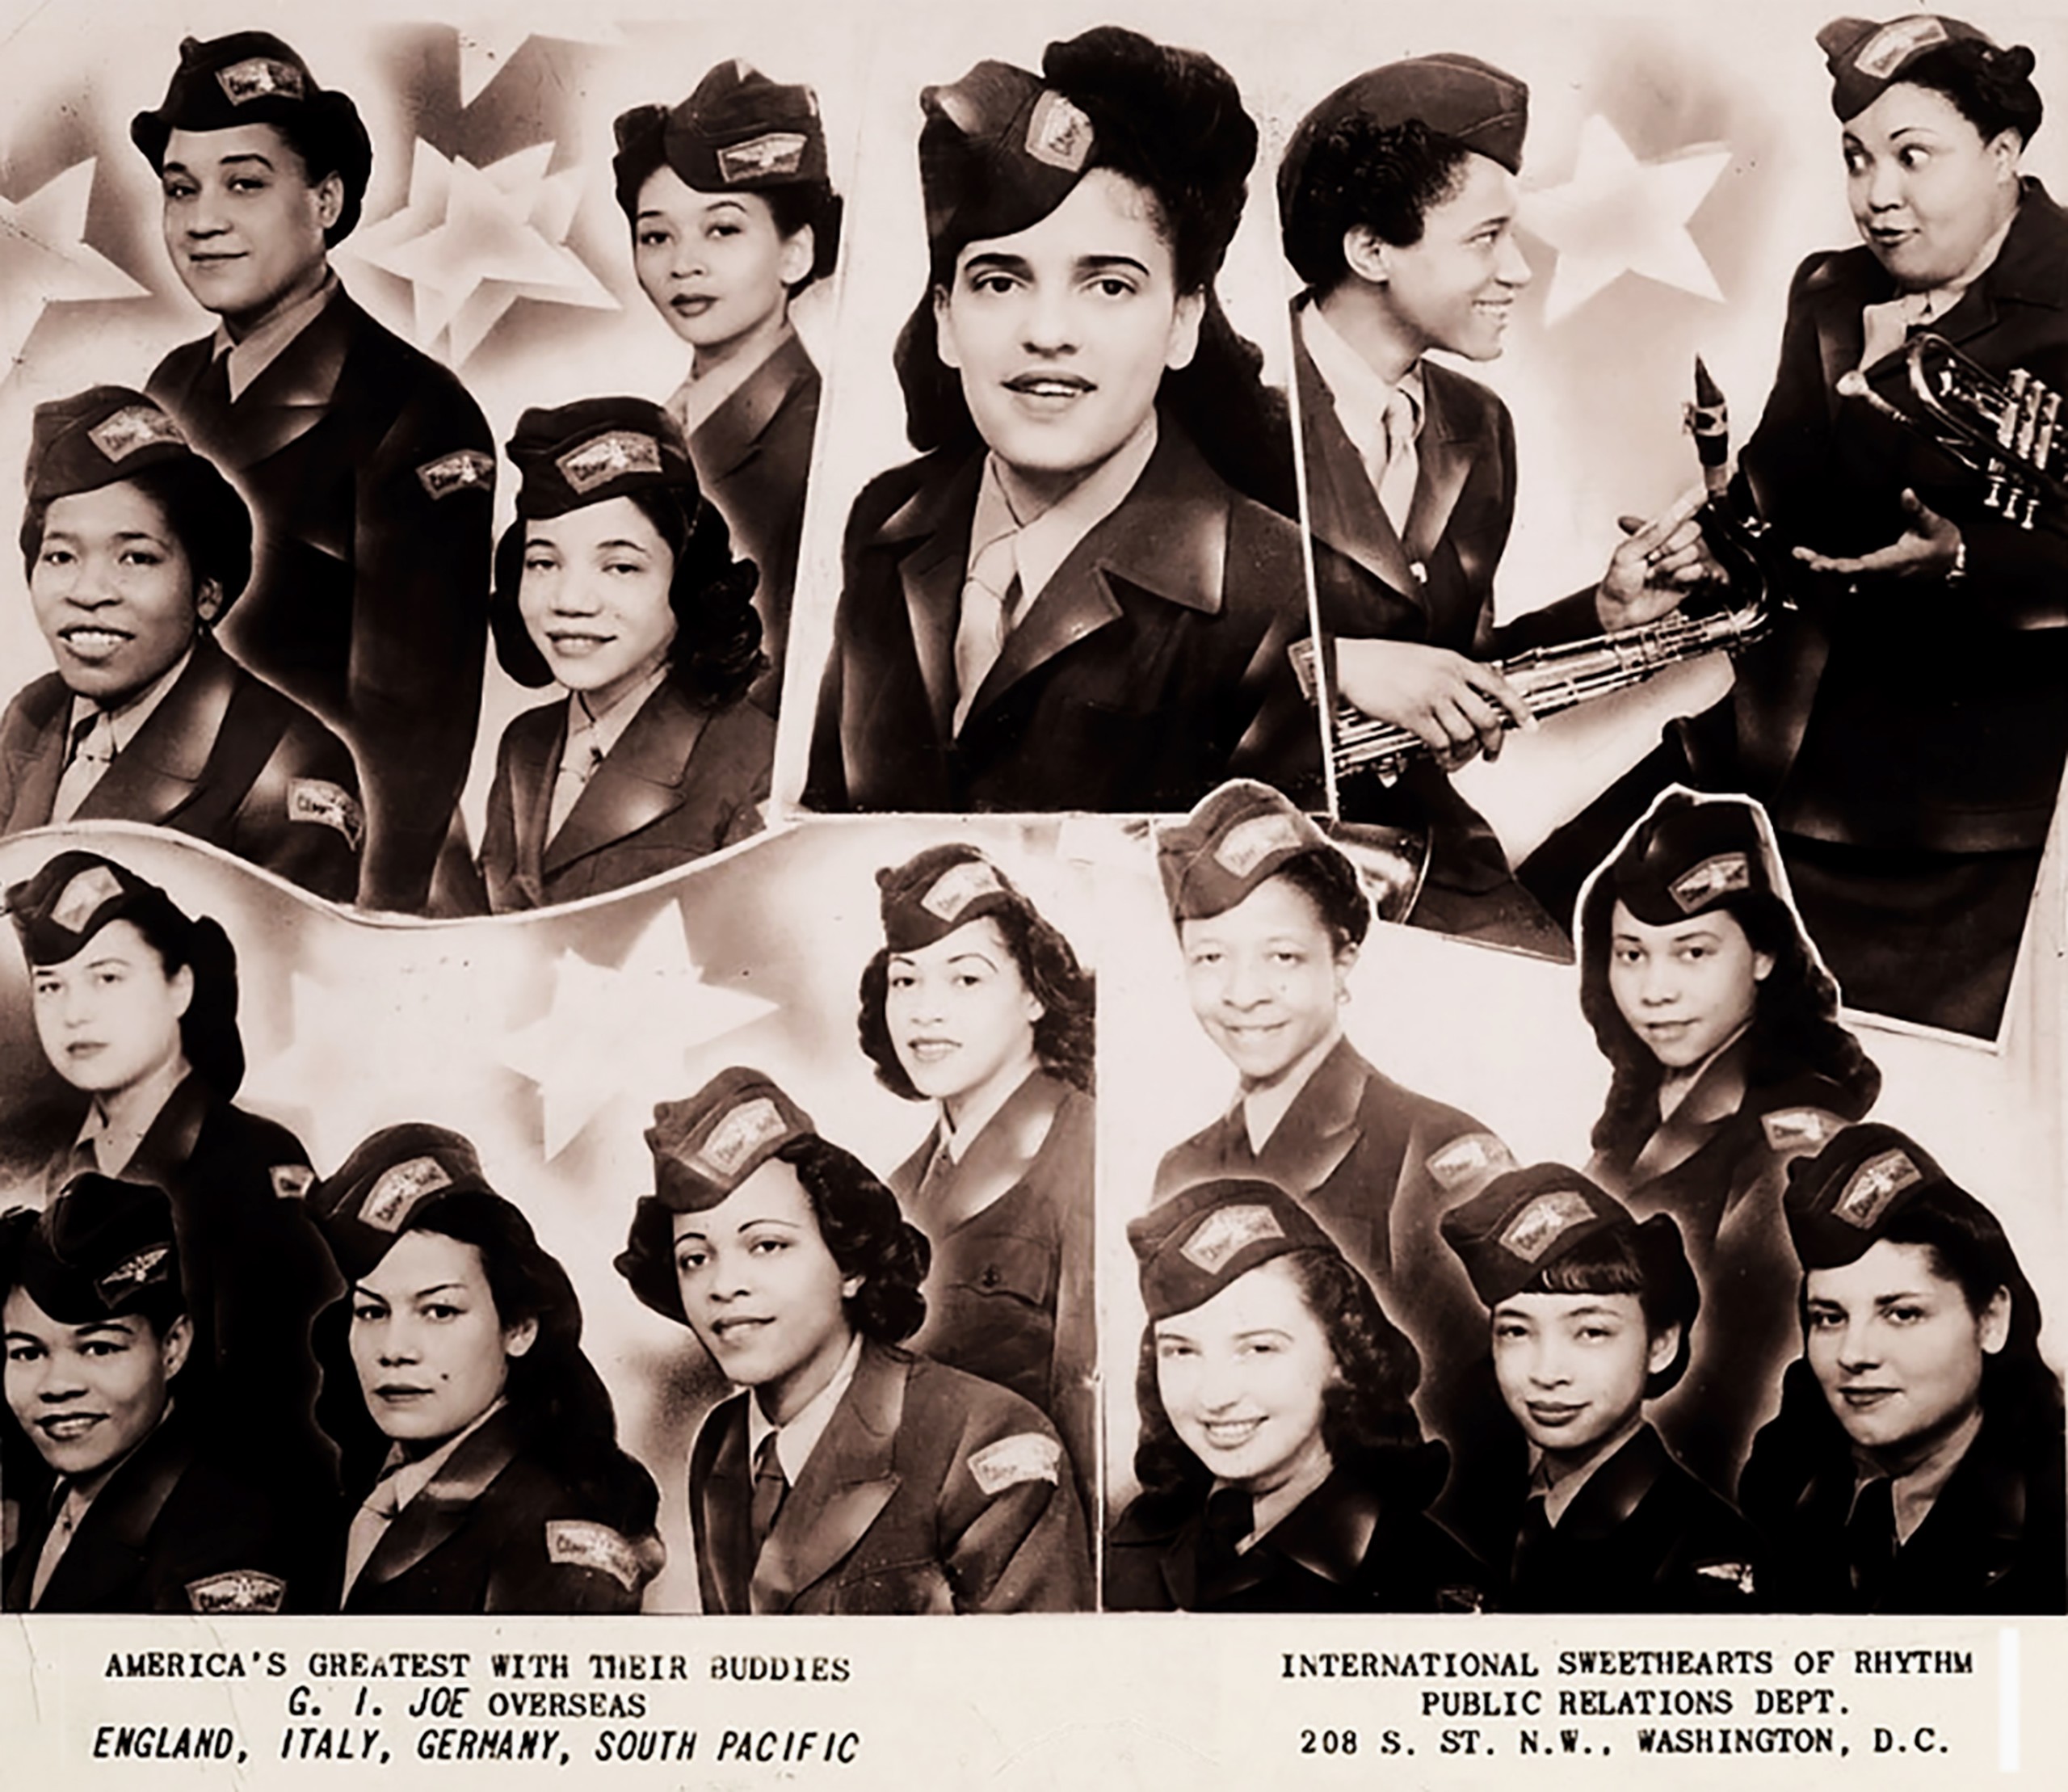 NMAH Archives Center International Sweethearts of Rhythm Collection 1218 Series 2: Rosalind Cron Materials Box 1 Folder 9 Groups of International Sweethearts of Rhythm members in uniform labeled with "American"s Greatest with their budidies G. I. Joe overseas